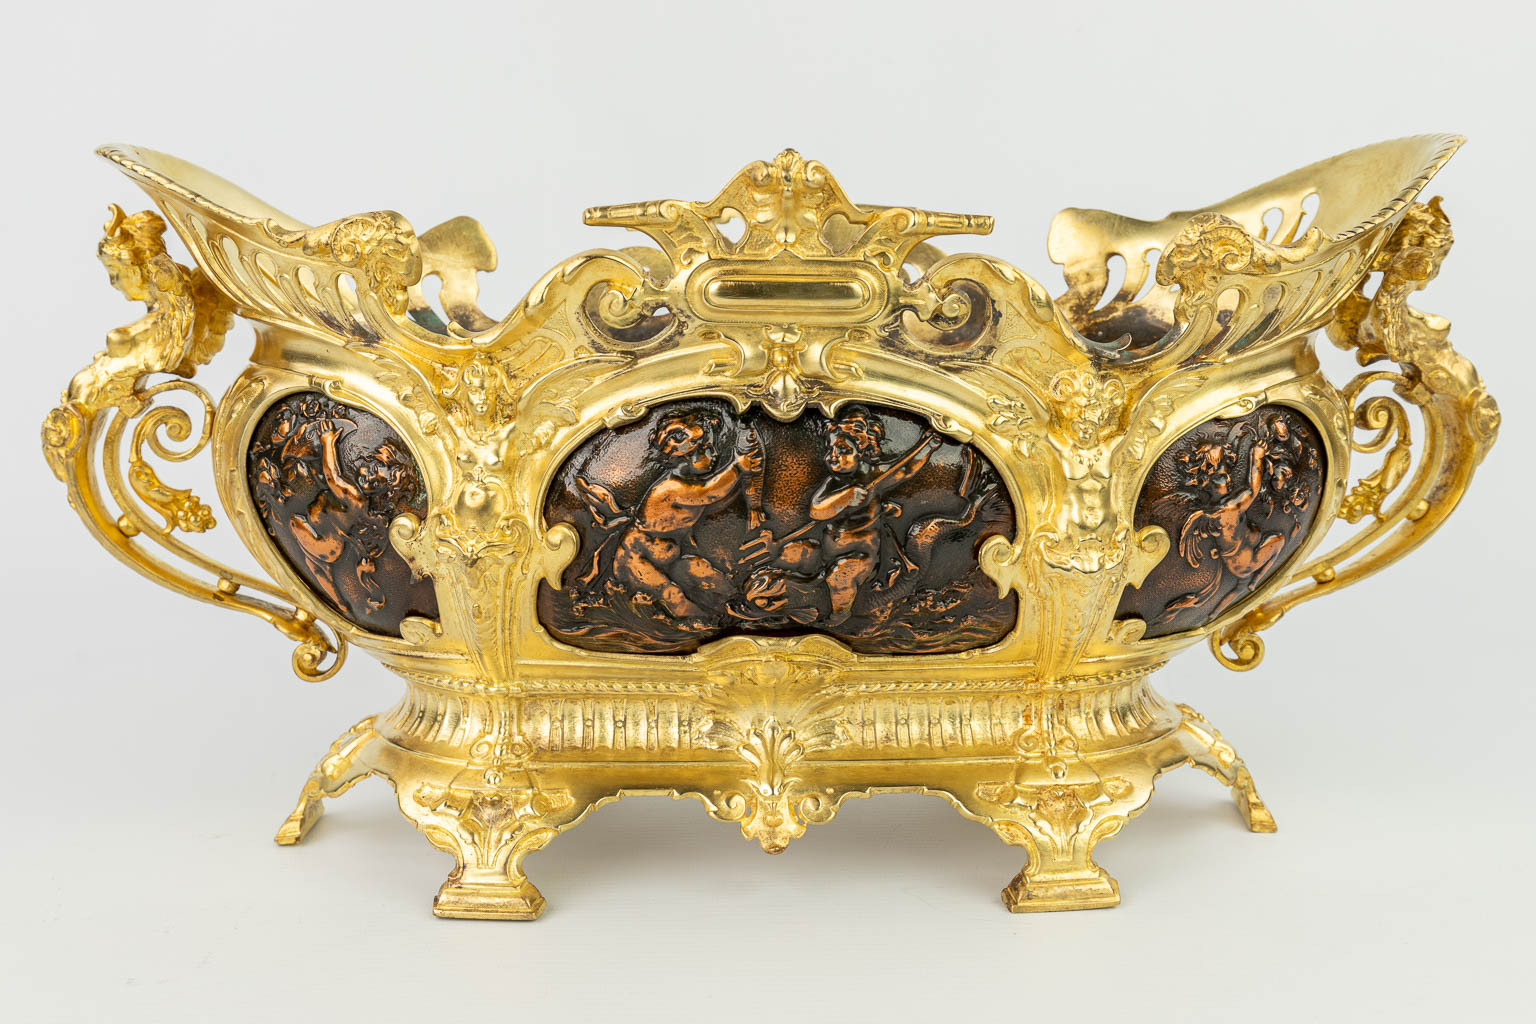 A three-piece mantle garniture made of jardinières, copper and gilt bronze decorated with putti. (H:22cm)